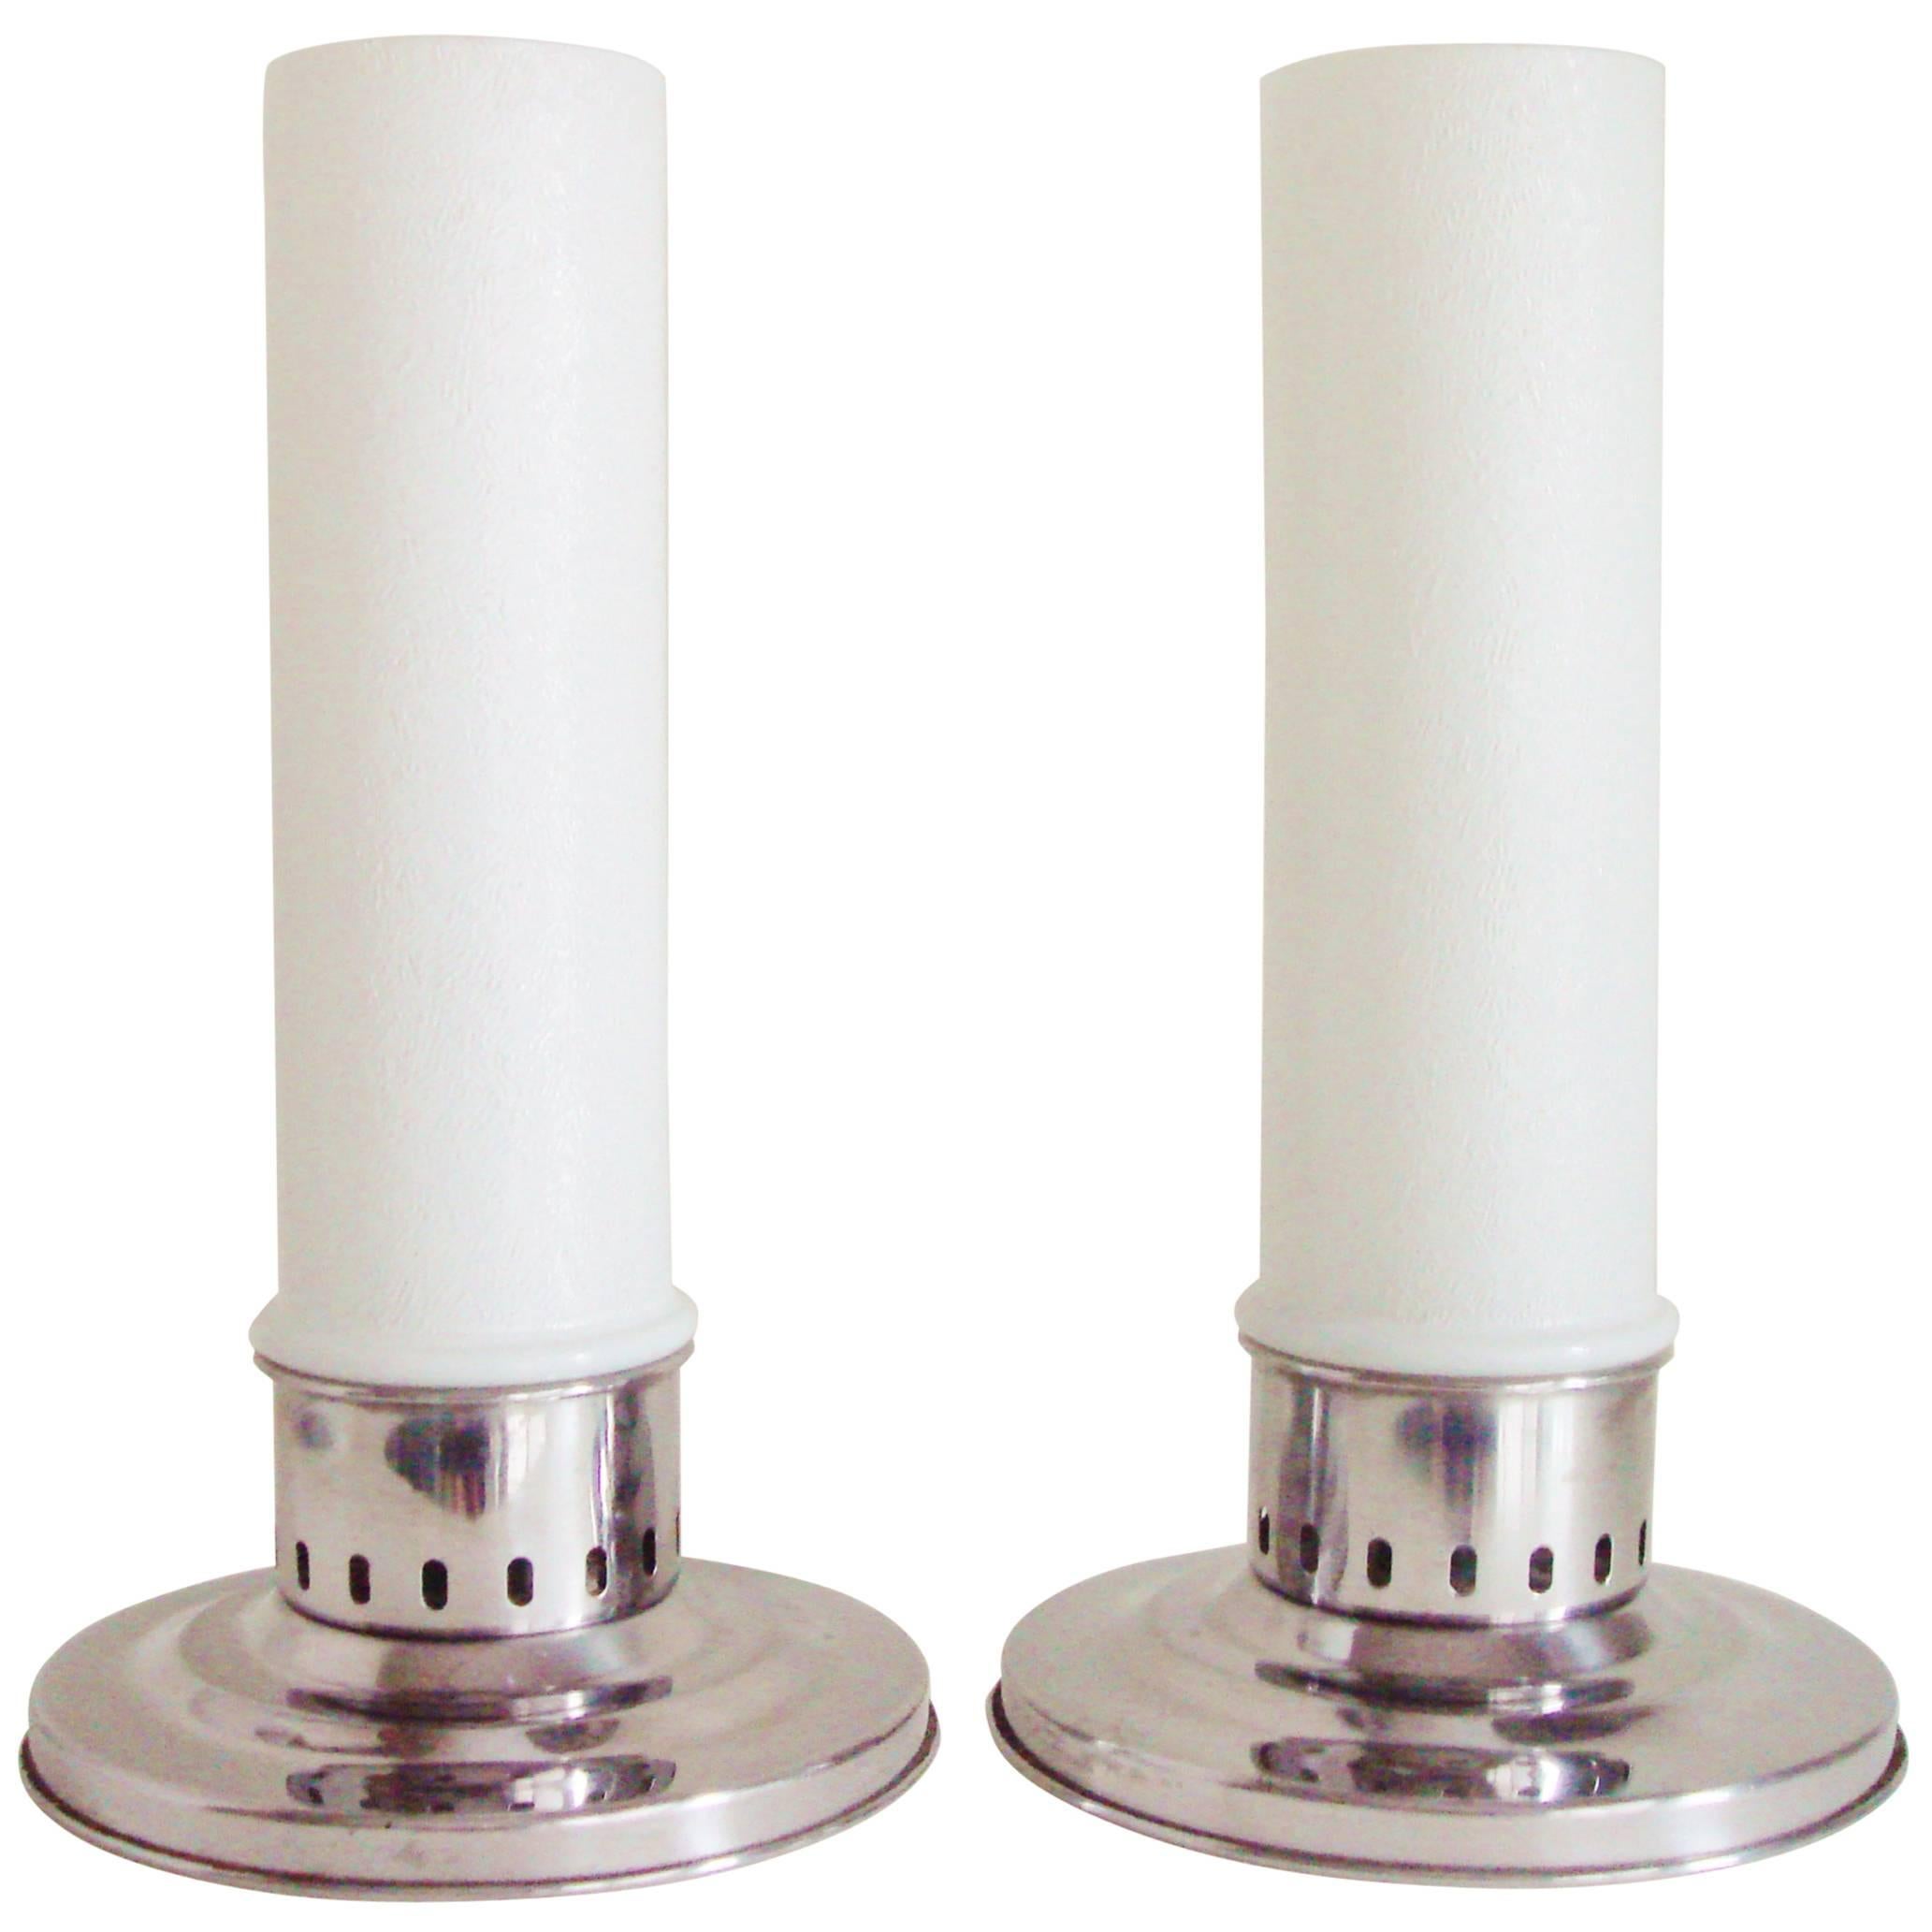 Pair of American Mid-Century Chrome and Milk Glass Candle Lamps by Bloomfield.